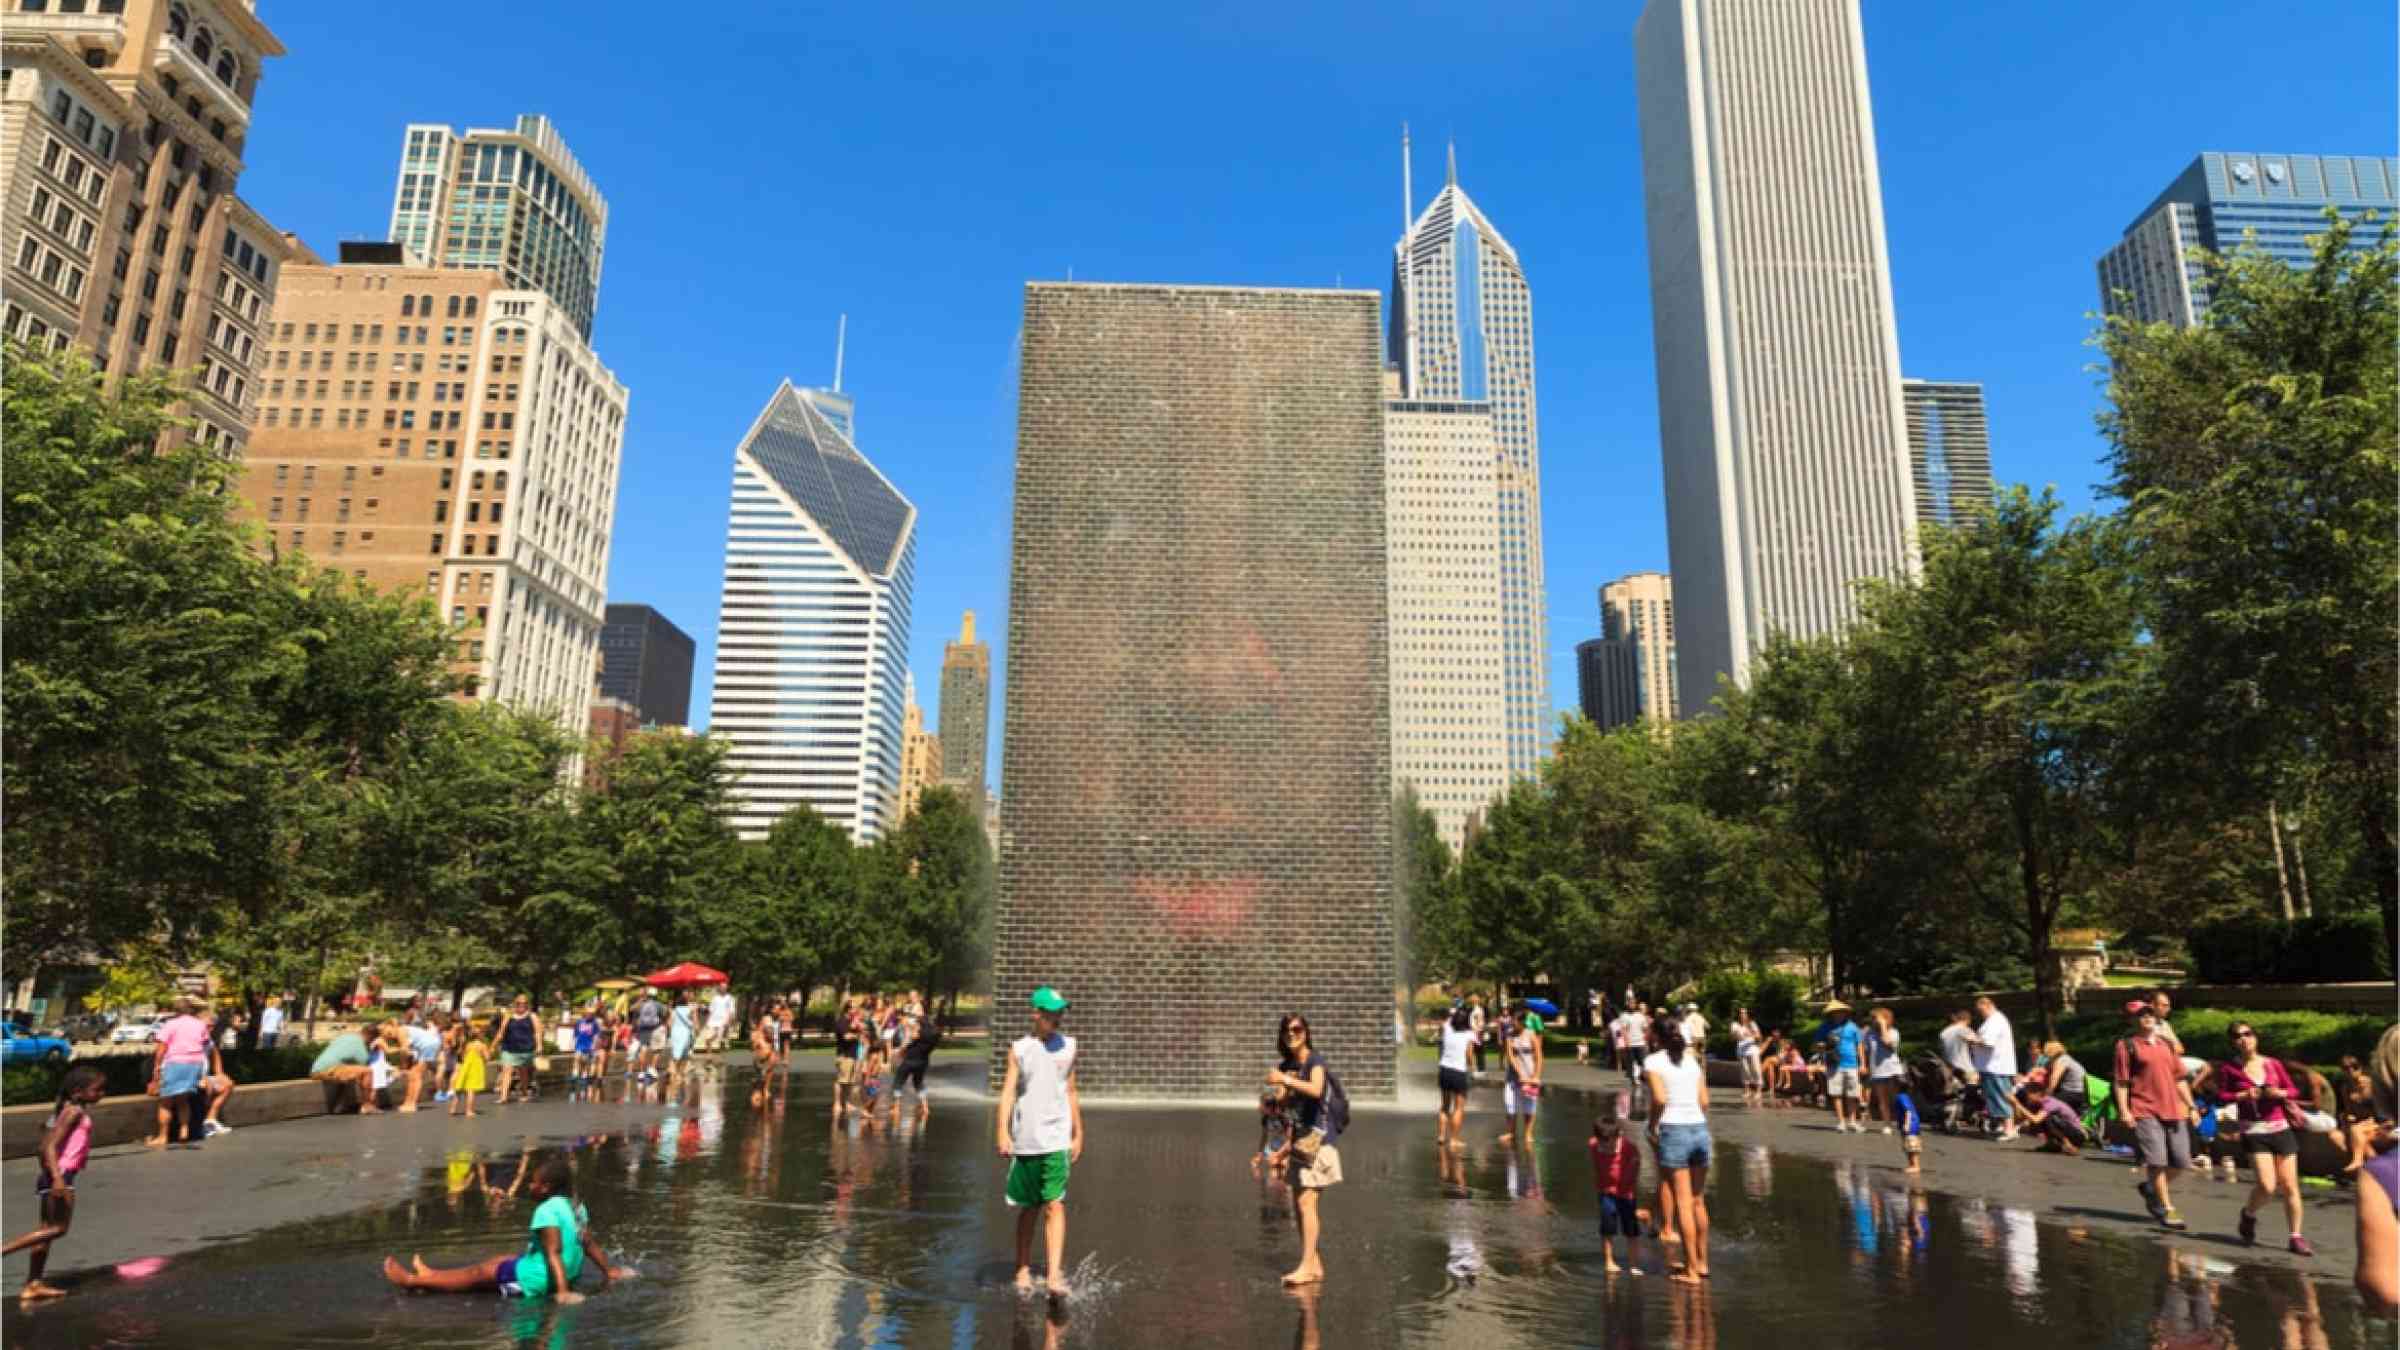 People cooling off in a fountain in Chicago